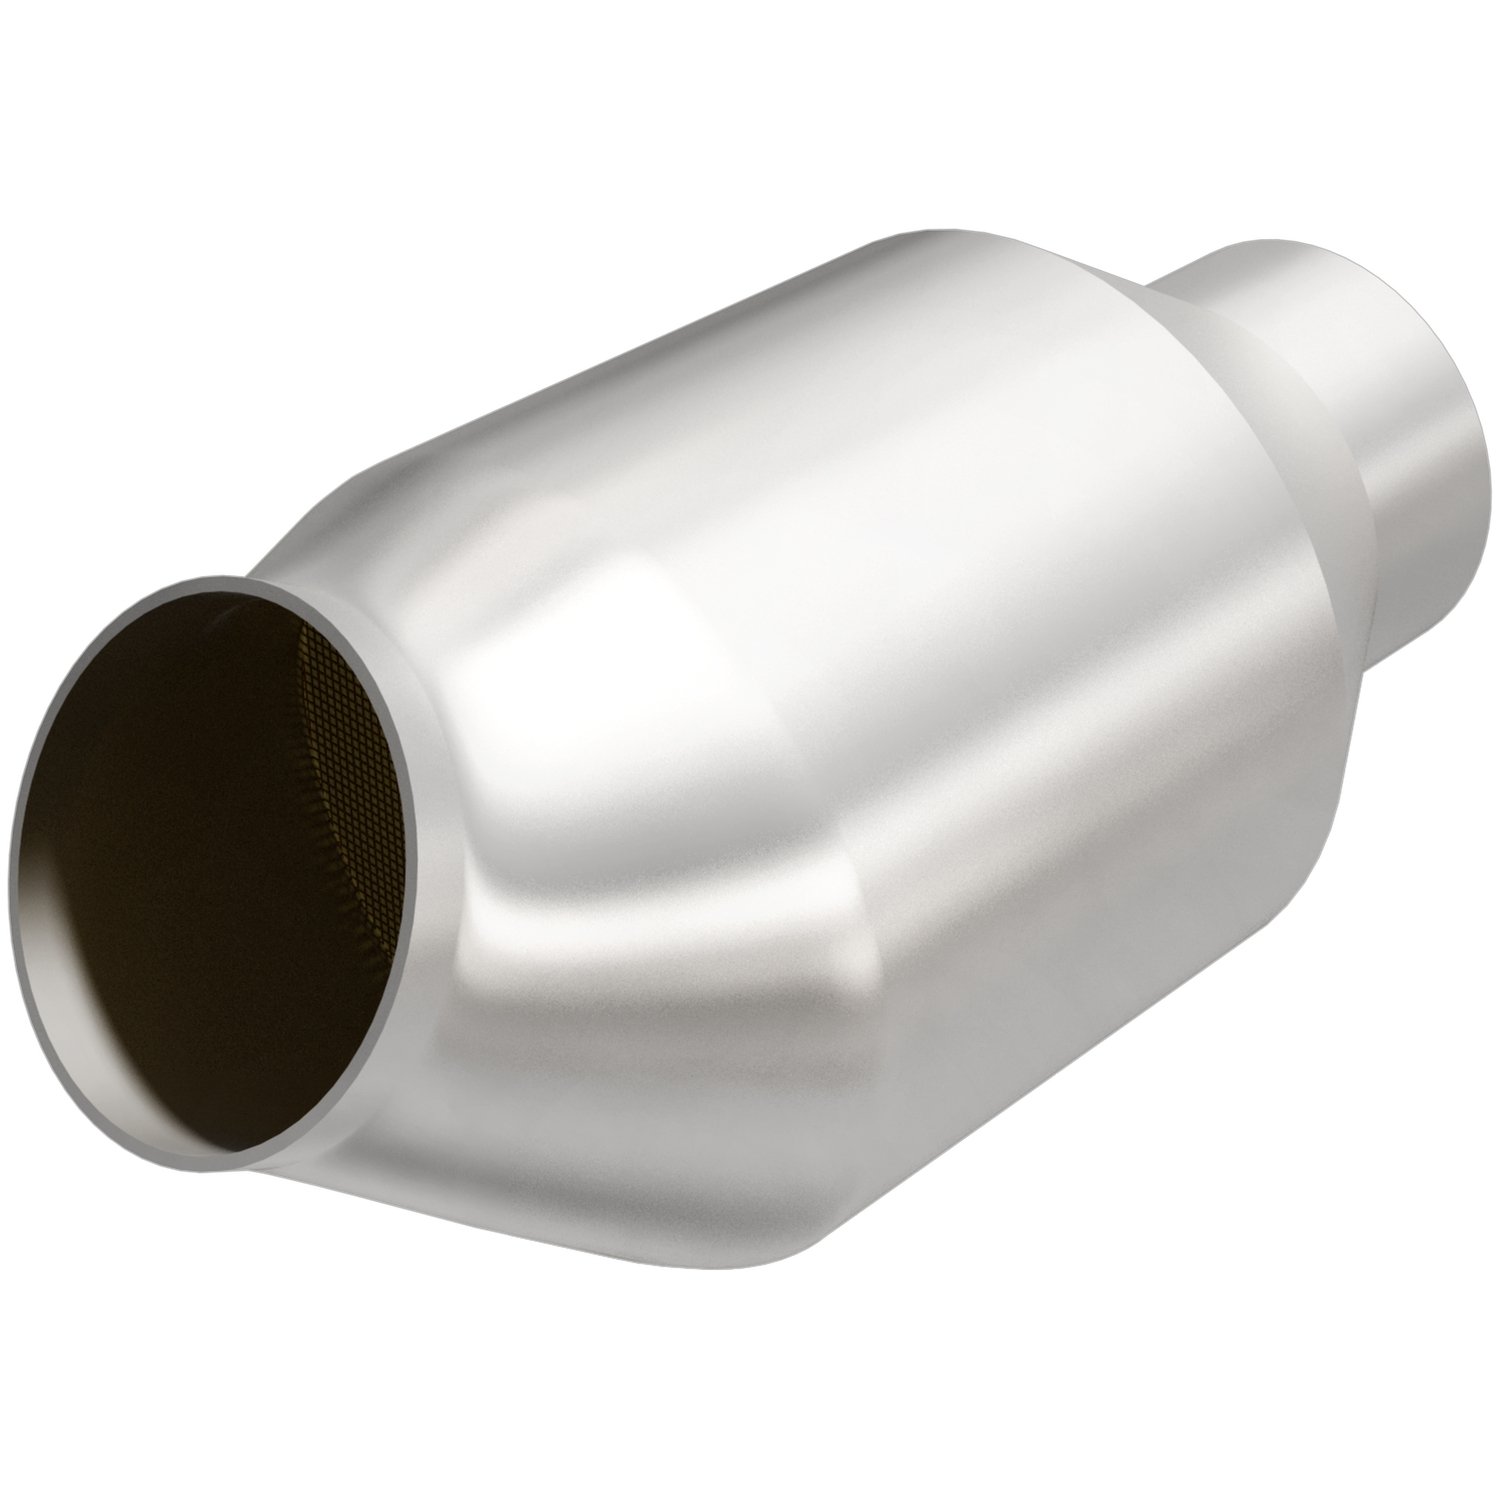 Pre OBD-II Spun Catalytic Converter Inlet/Outlet: 2.25" (Angled Inlet)